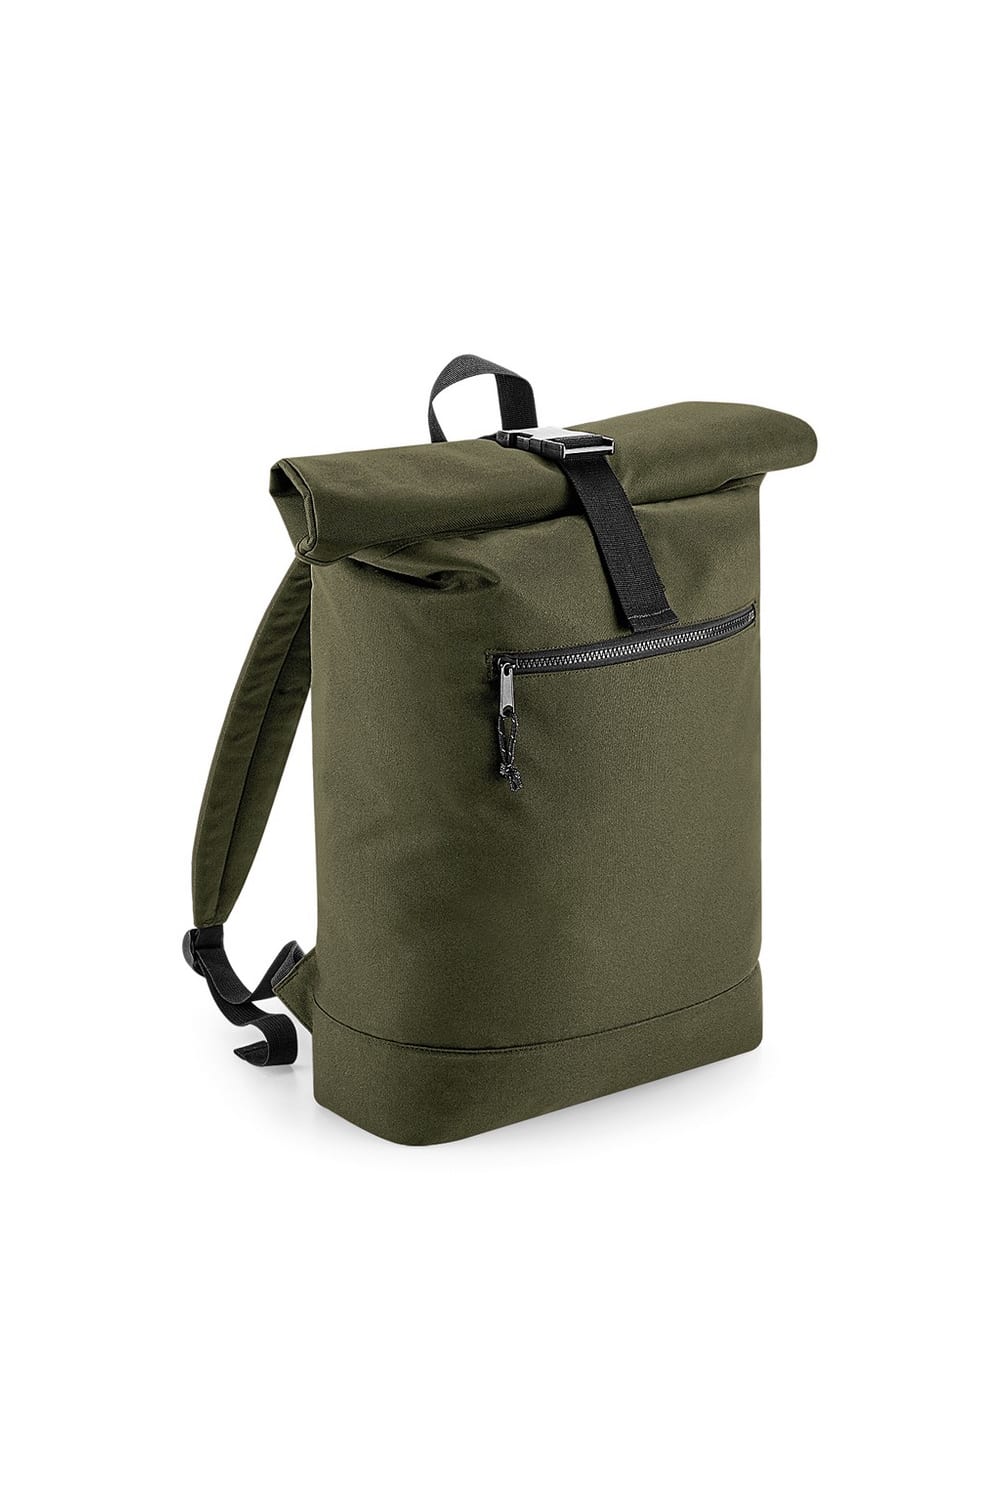 BagBase Unisex Recycled Roll-Top Backpack (Military Green) (One Size)